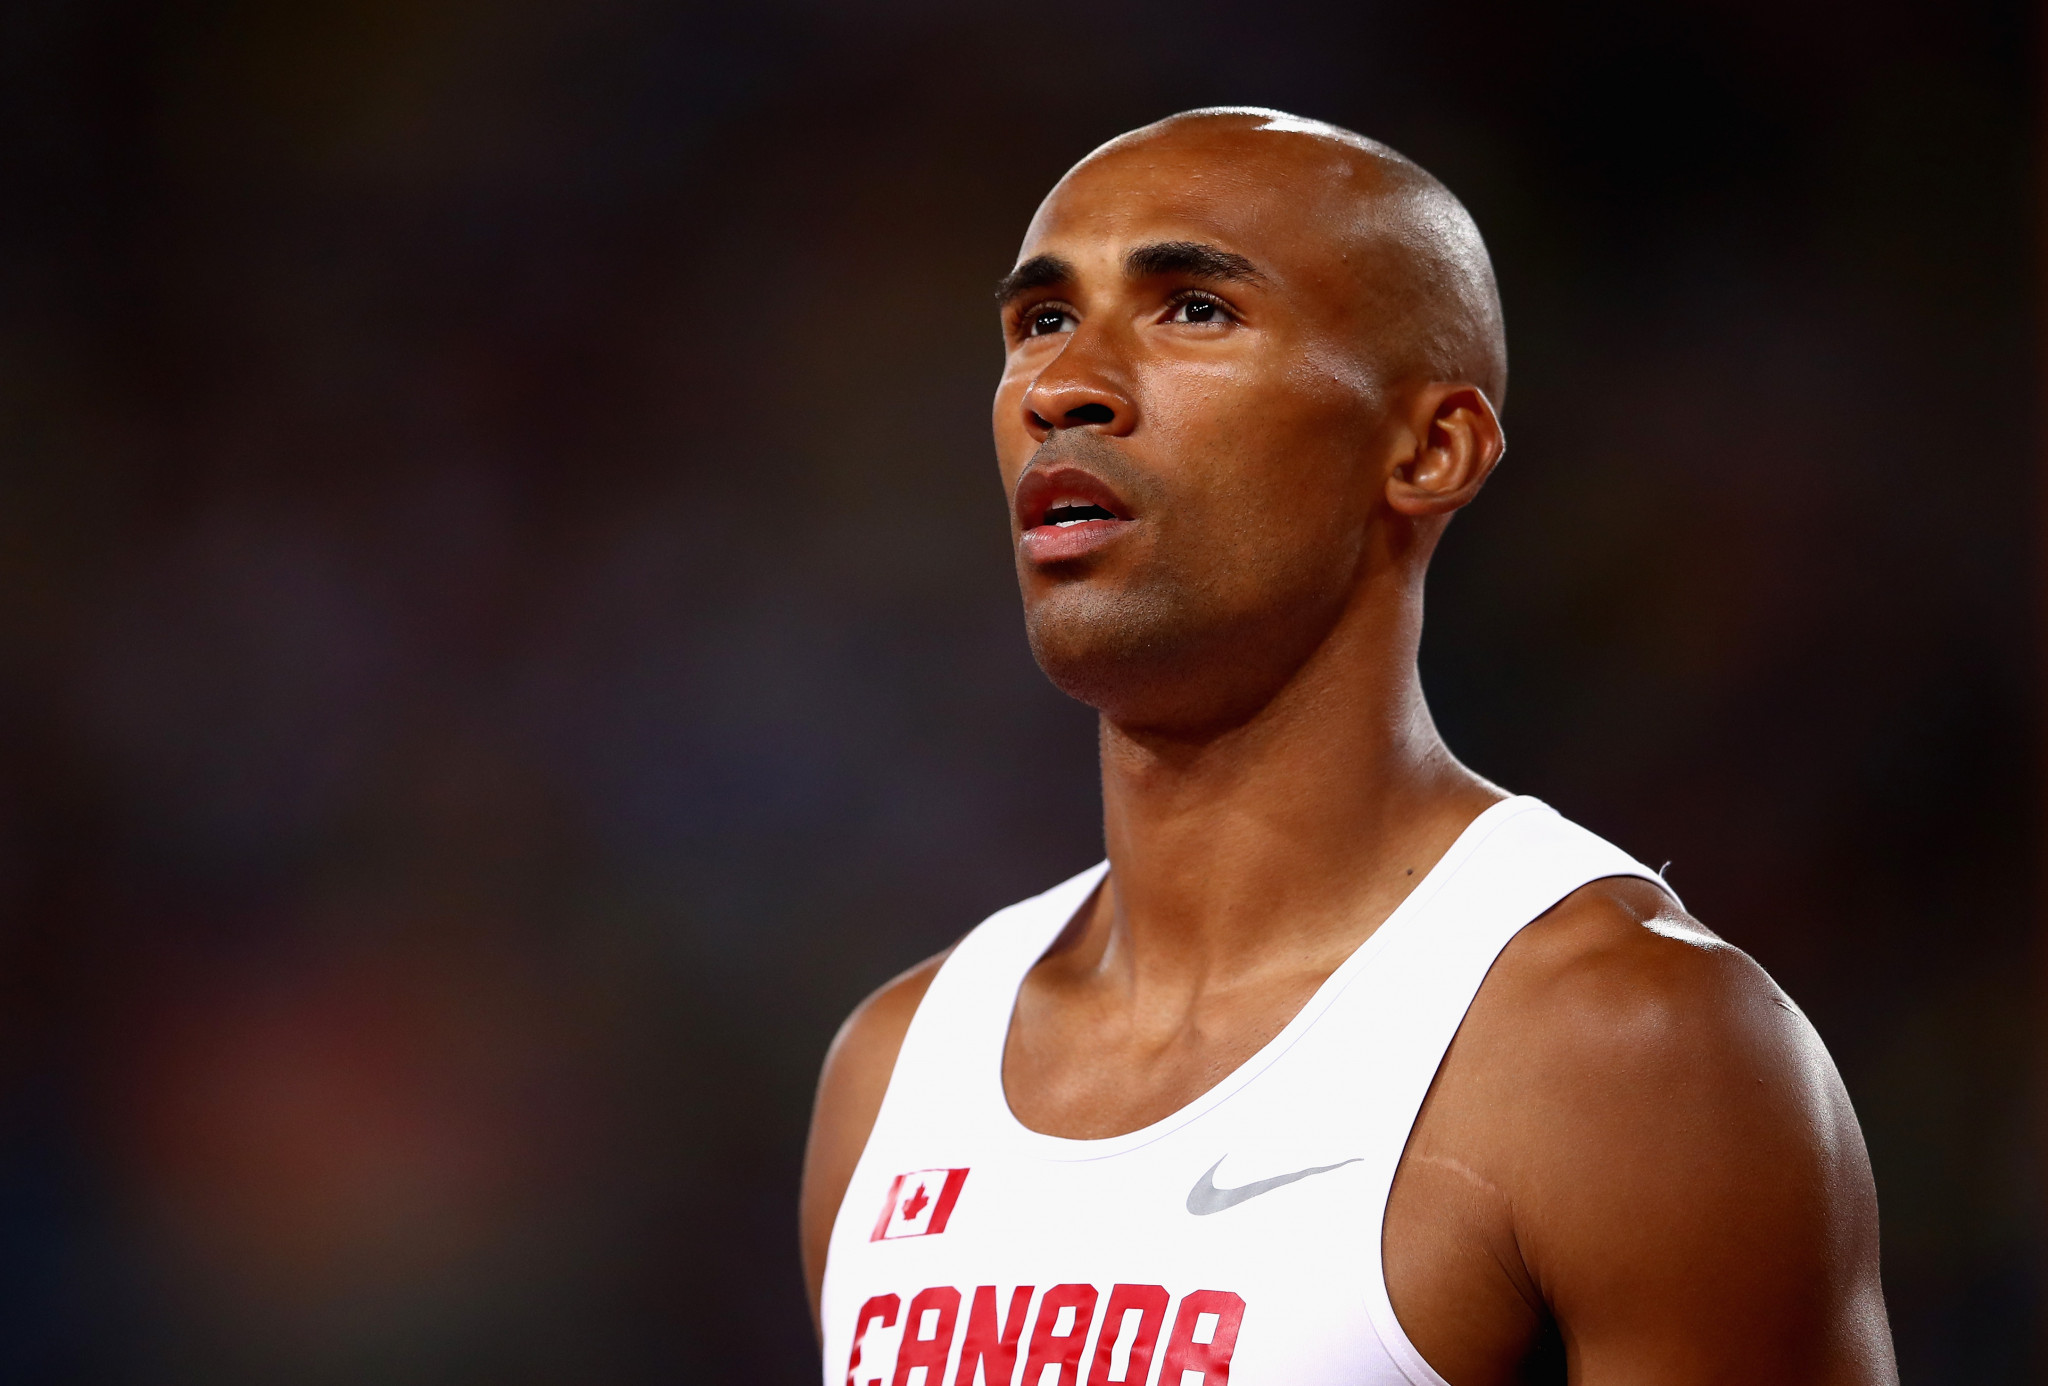 Olympic bronze medallist Damian Warner of Canada broke his own 100 metres decathlon world record ©Getty Images